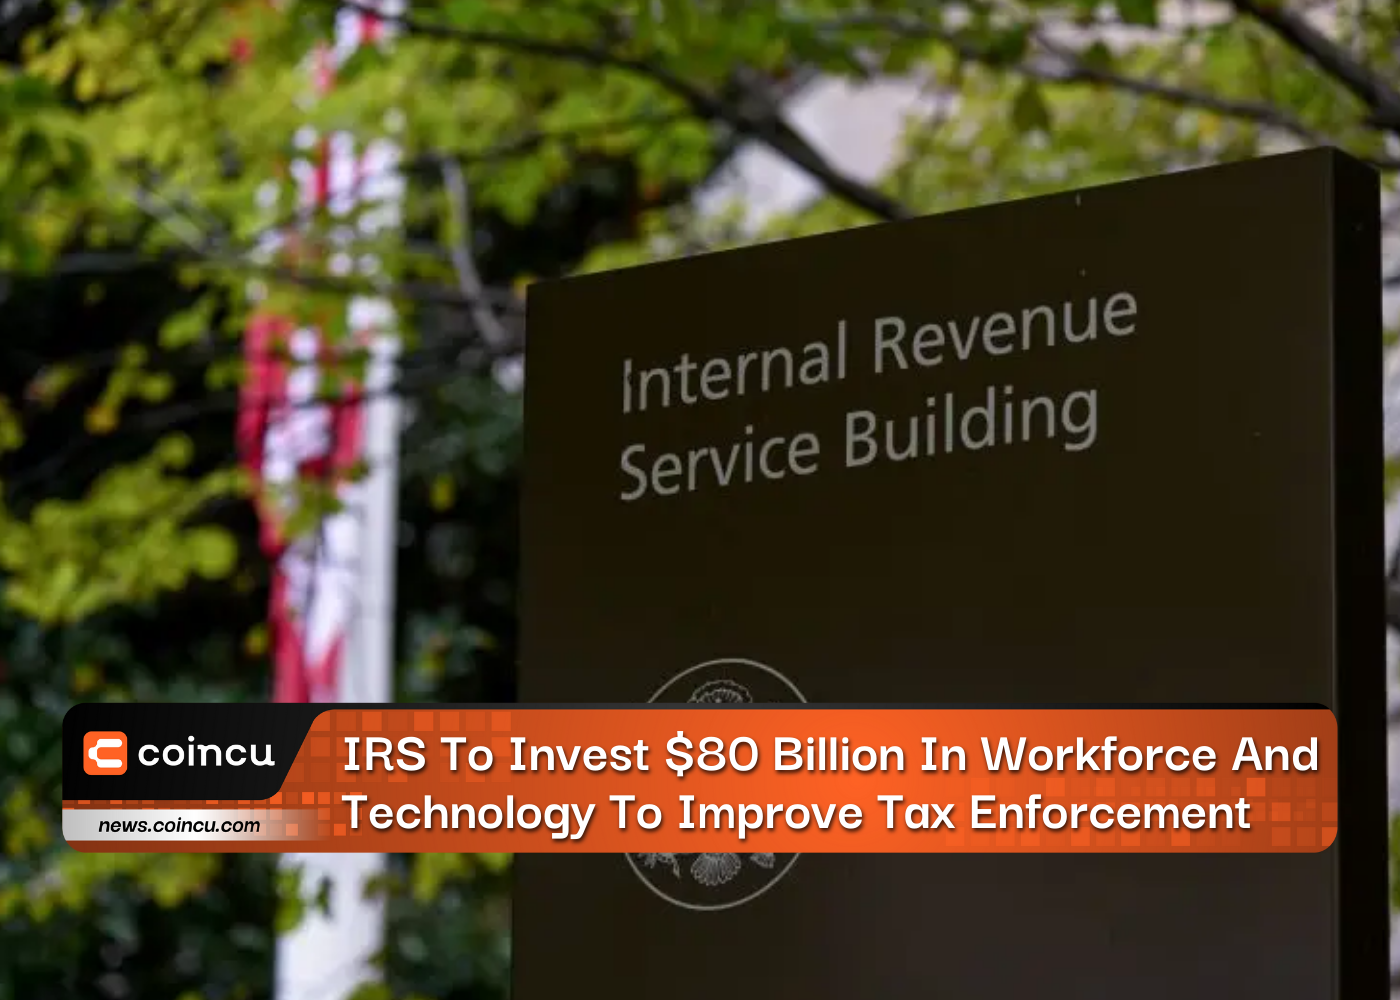 IRS To Invest $80 Billion In Workforce And Technology To Improve Tax Enforcement